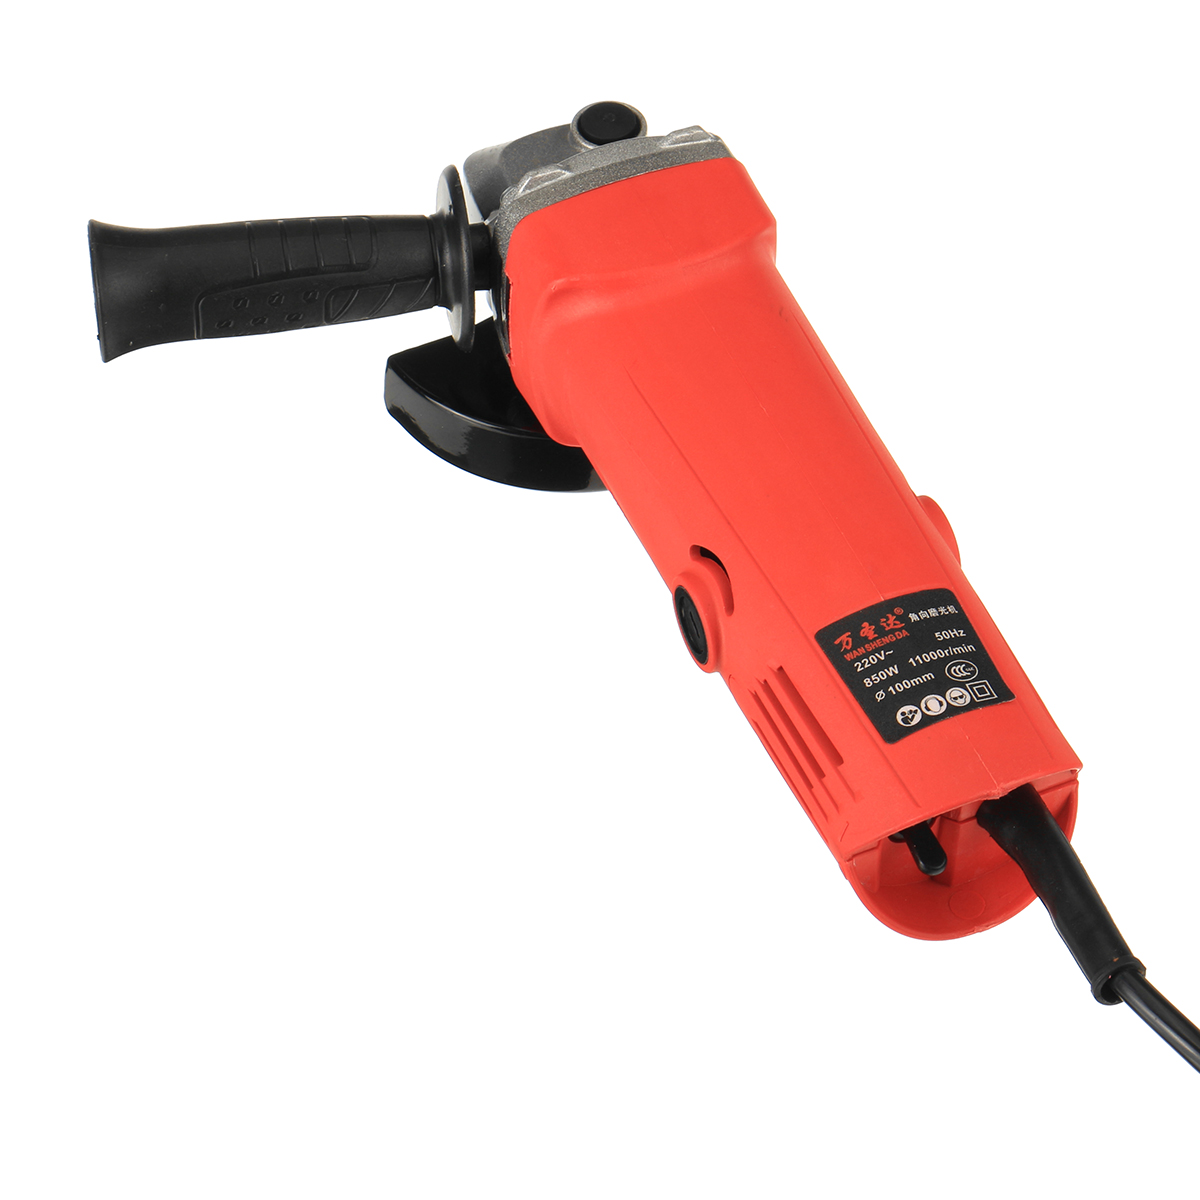 850W-100mm-11000rpm-Electric-Angle-Grinder-Cutting-Machine-Handheld-Polishing-Grinding-Carving-Tool-1736781-10